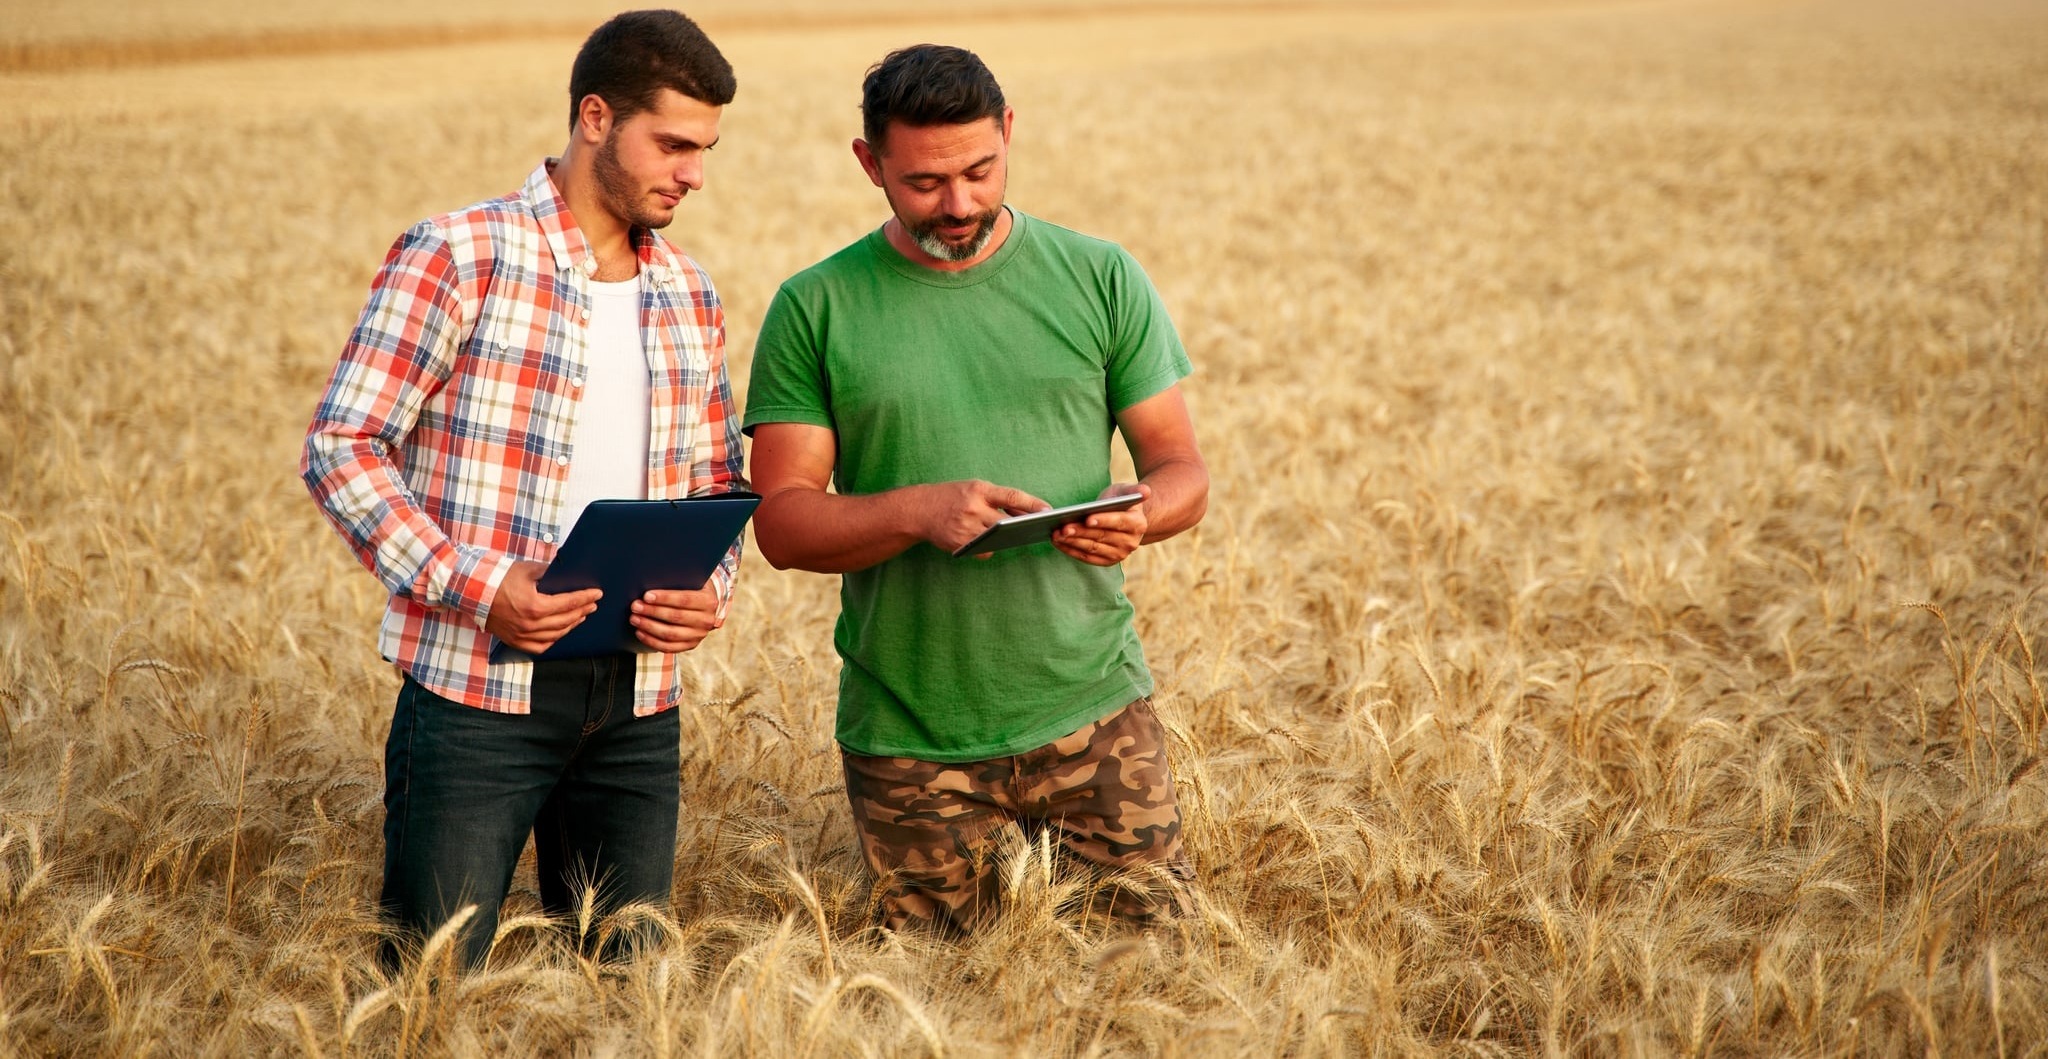 Two men standing together in the middle of a wheat field, both looking down at the laptop computer in the hands of the man on the right